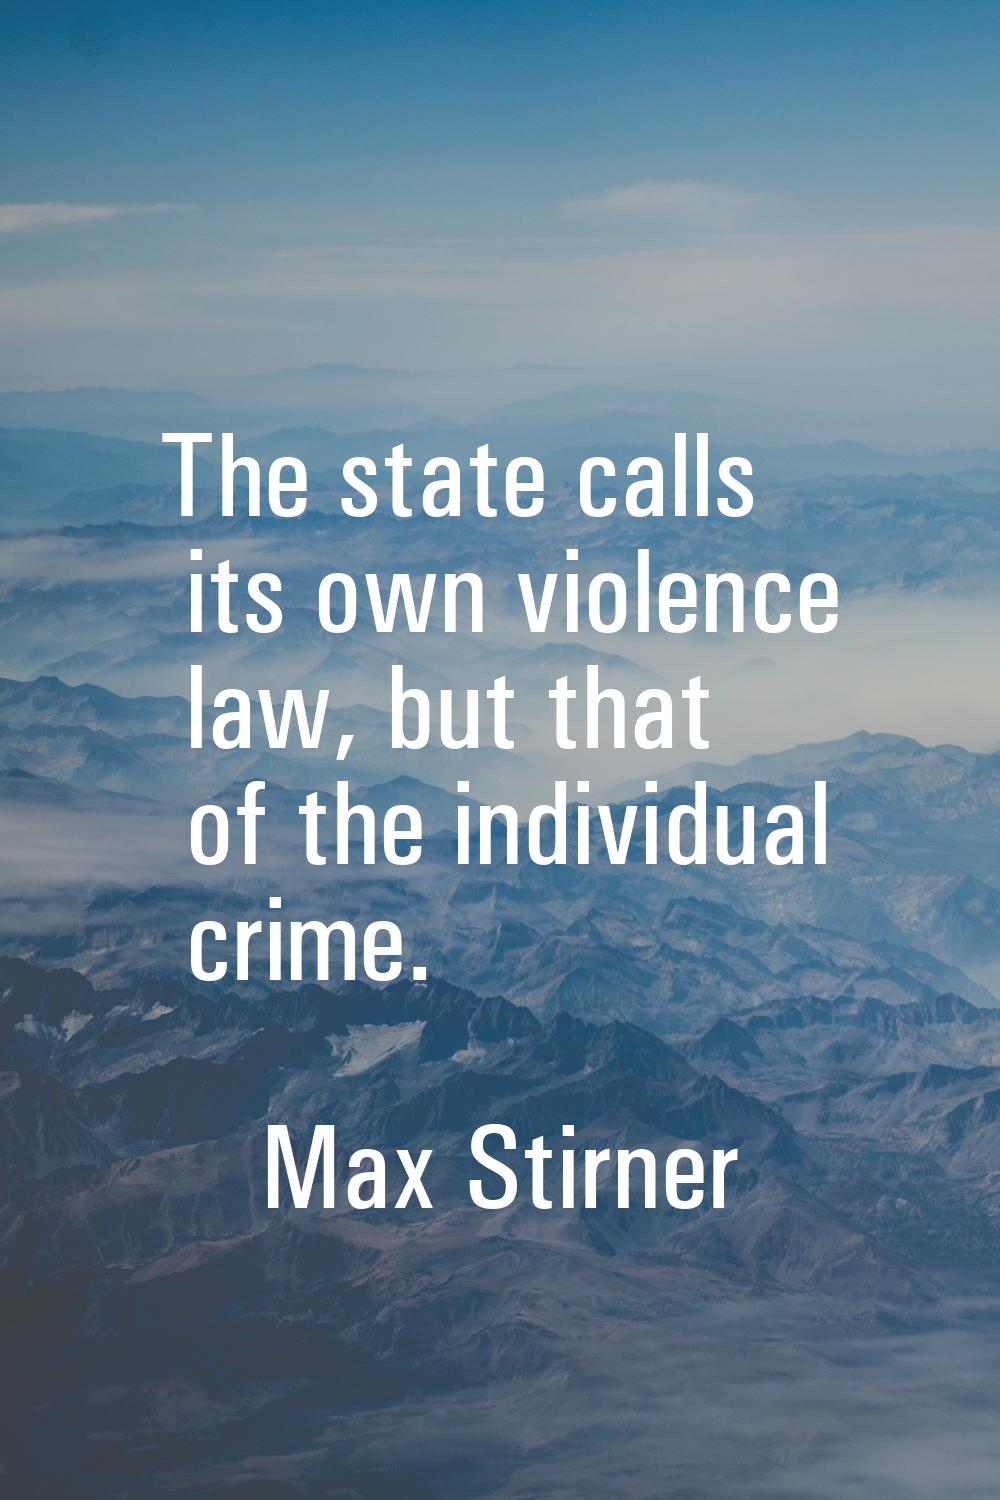 The state calls its own violence law, but that of the individual crime.